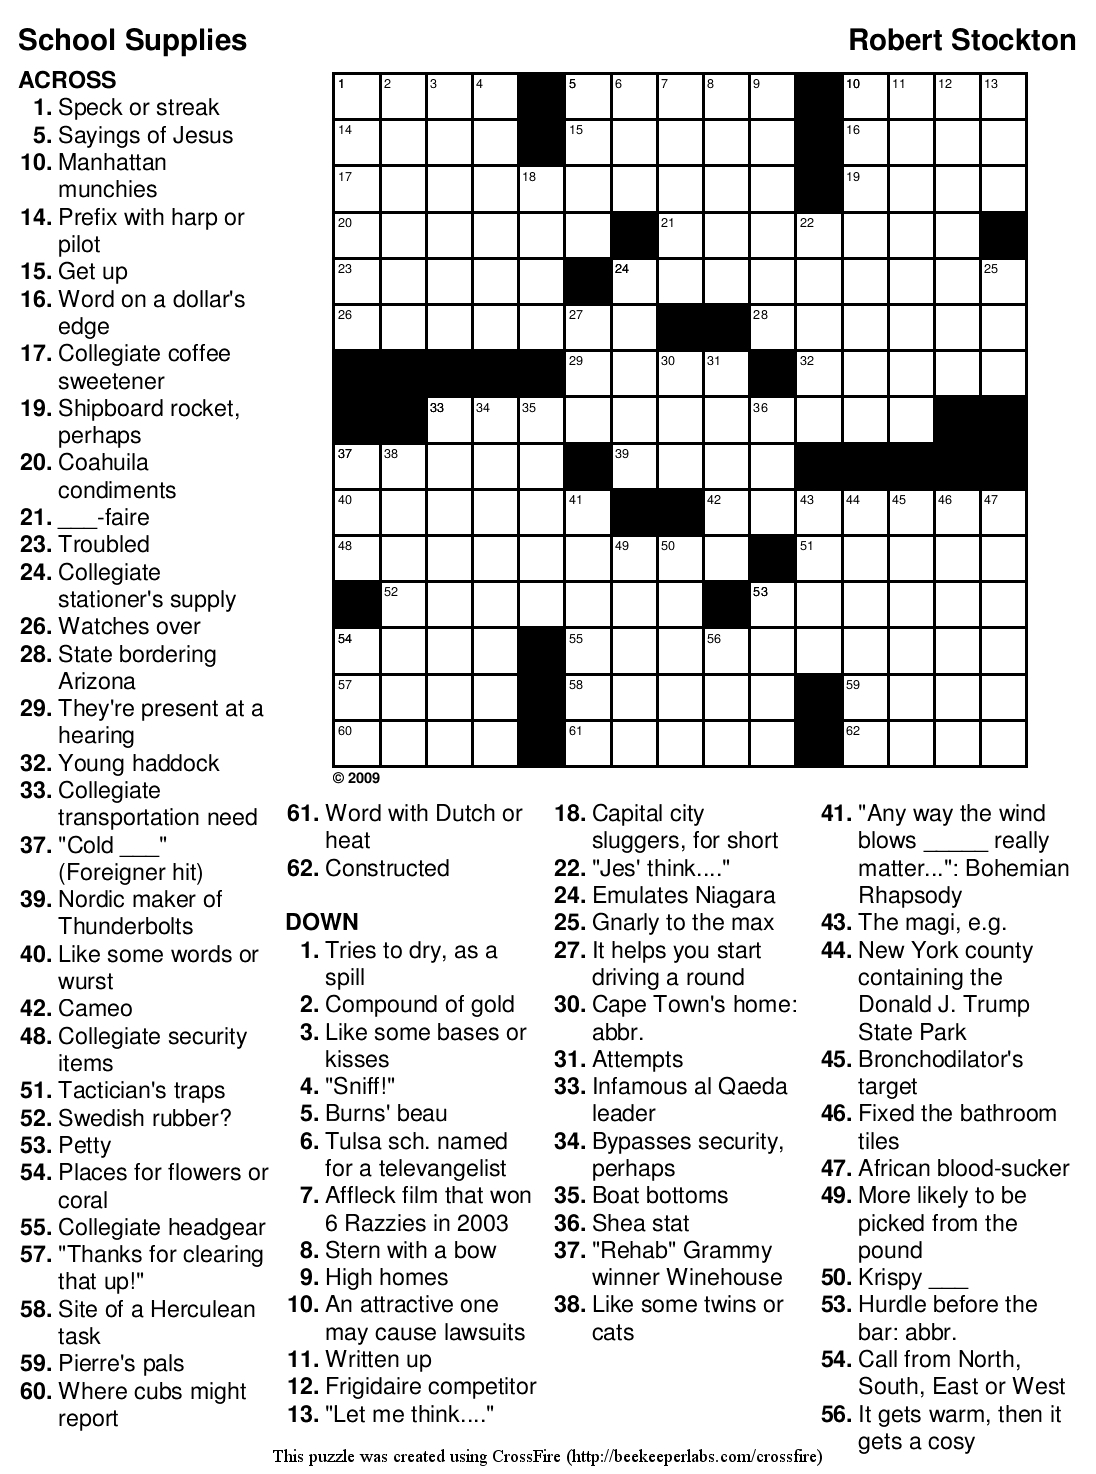 Printable Crosswords For Adults Free Printable Crossword Puzzles - Printable Crossword Puzzles For Adults Pdf